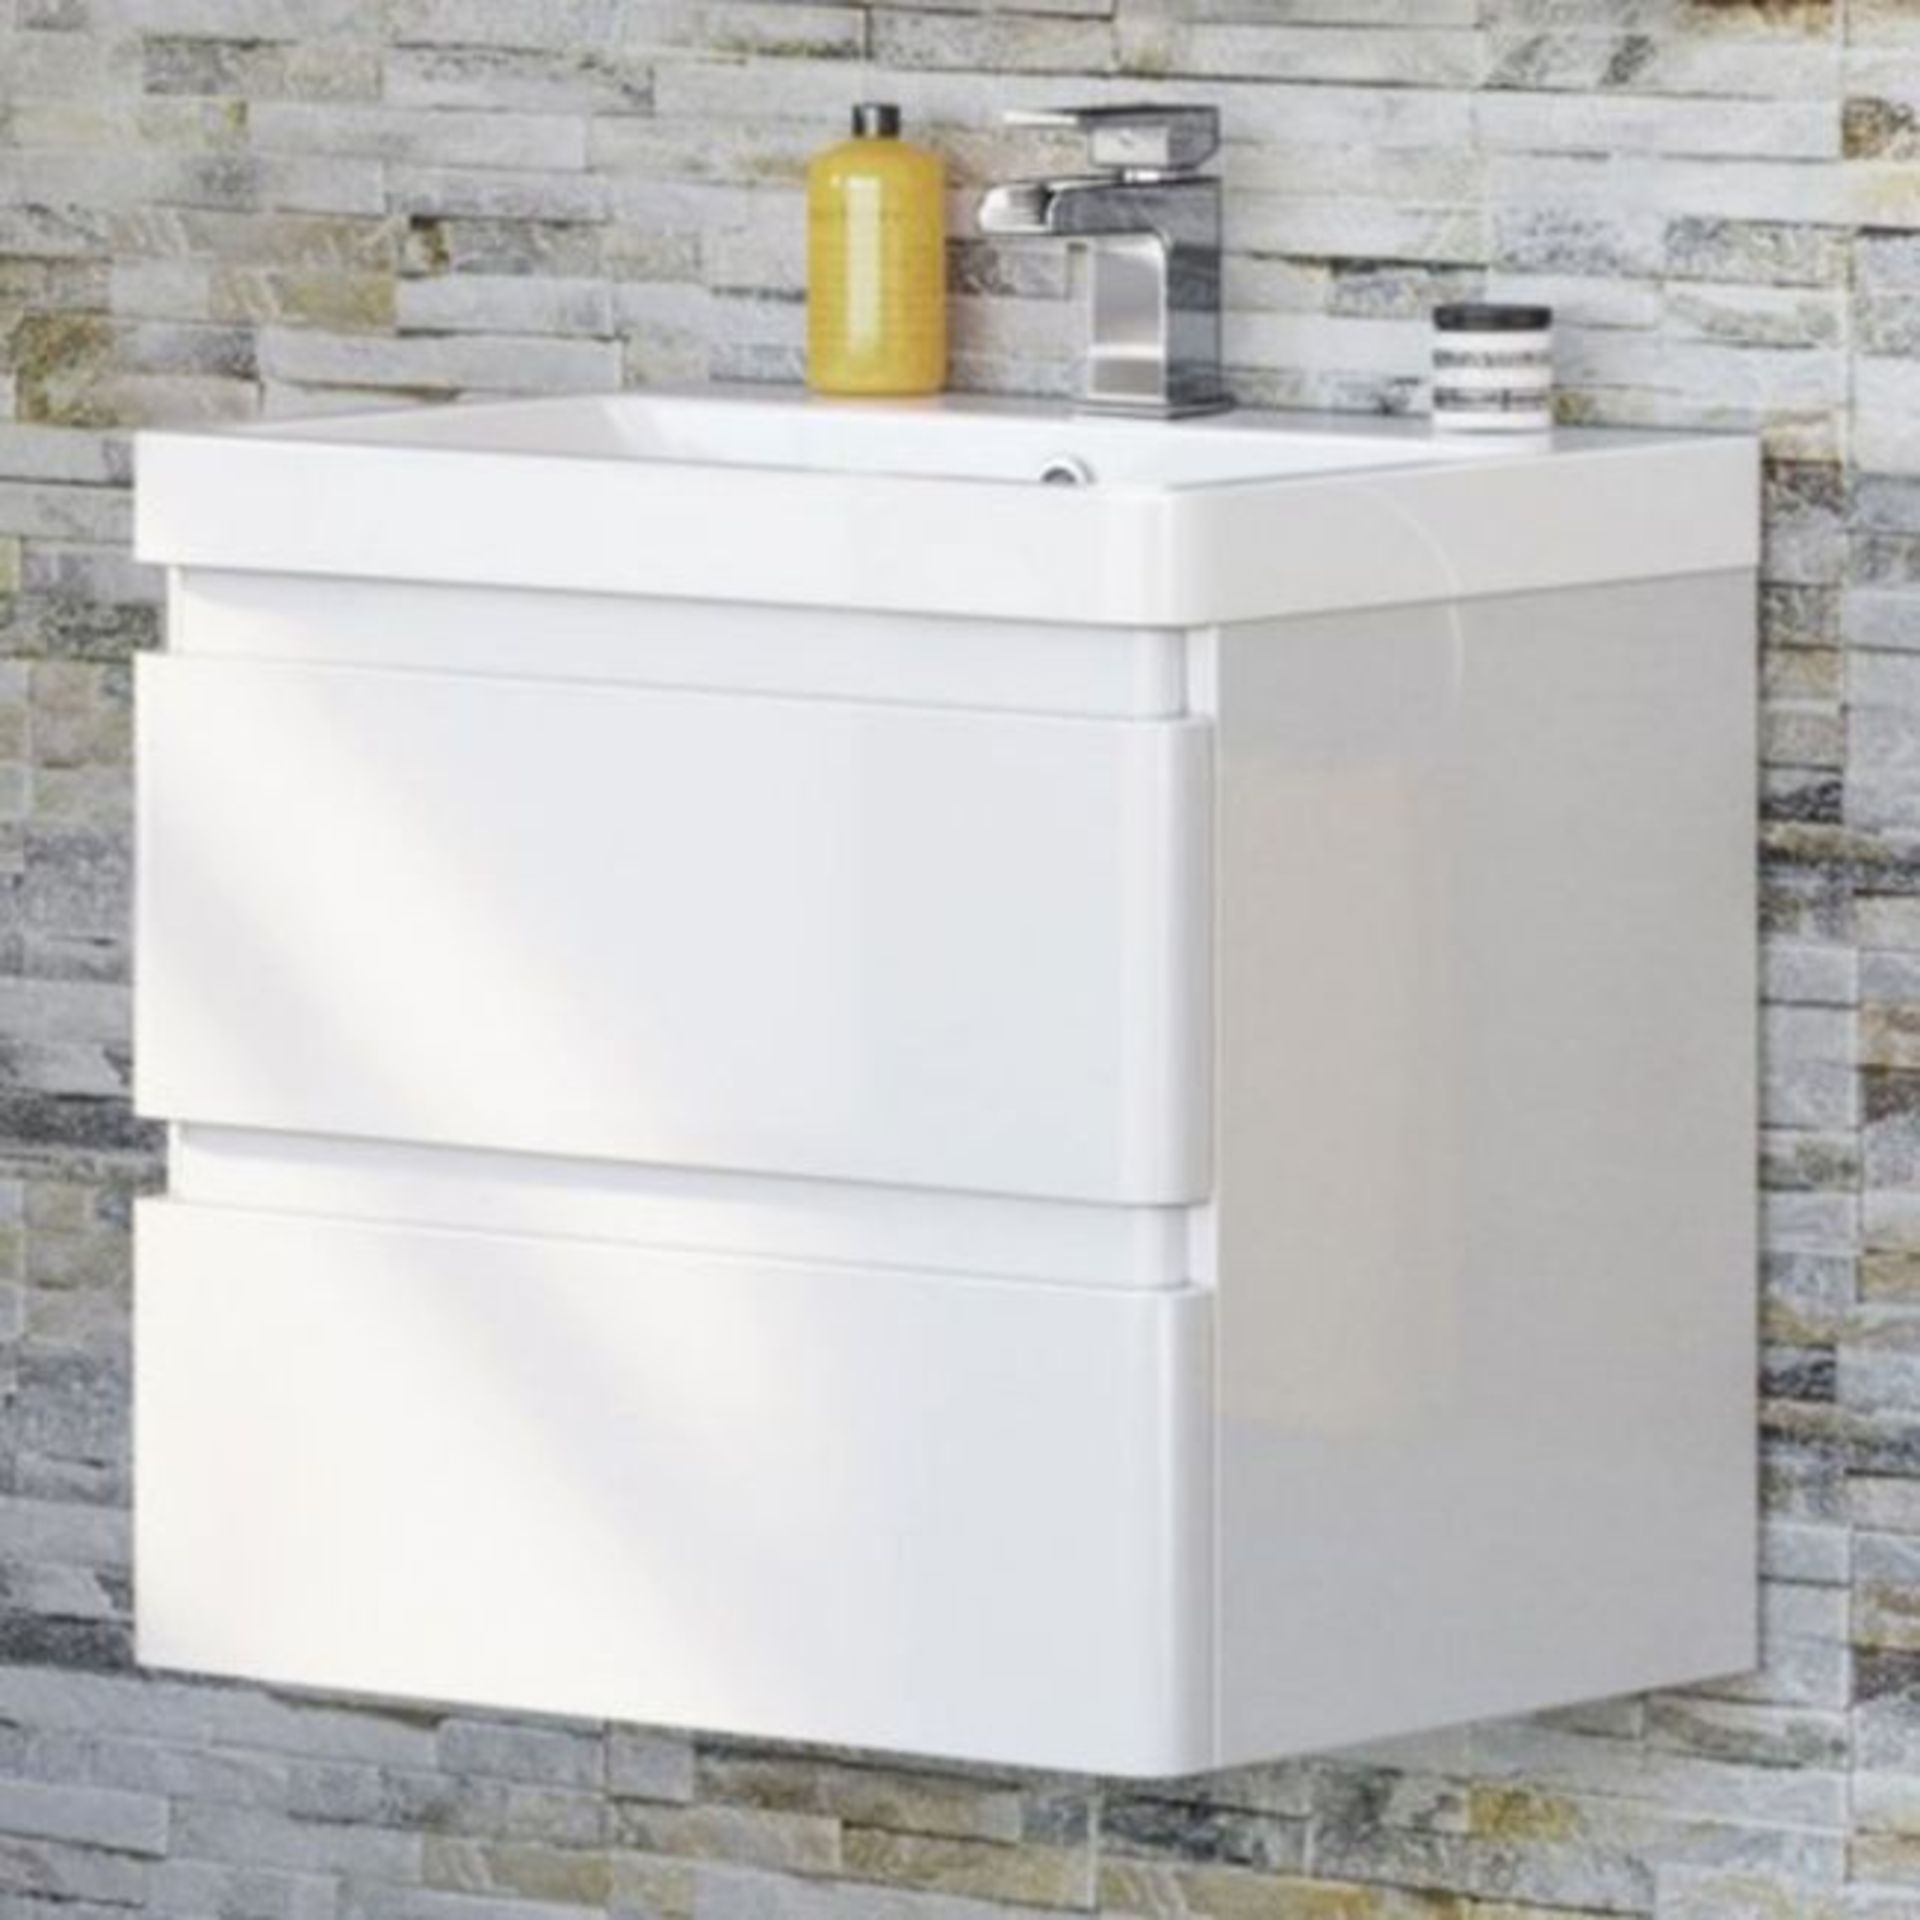 New & Boxed 600mm Denver II Gloss White Built In Basin Drawer Unit - Wall Hung. RRP £849.99 M...